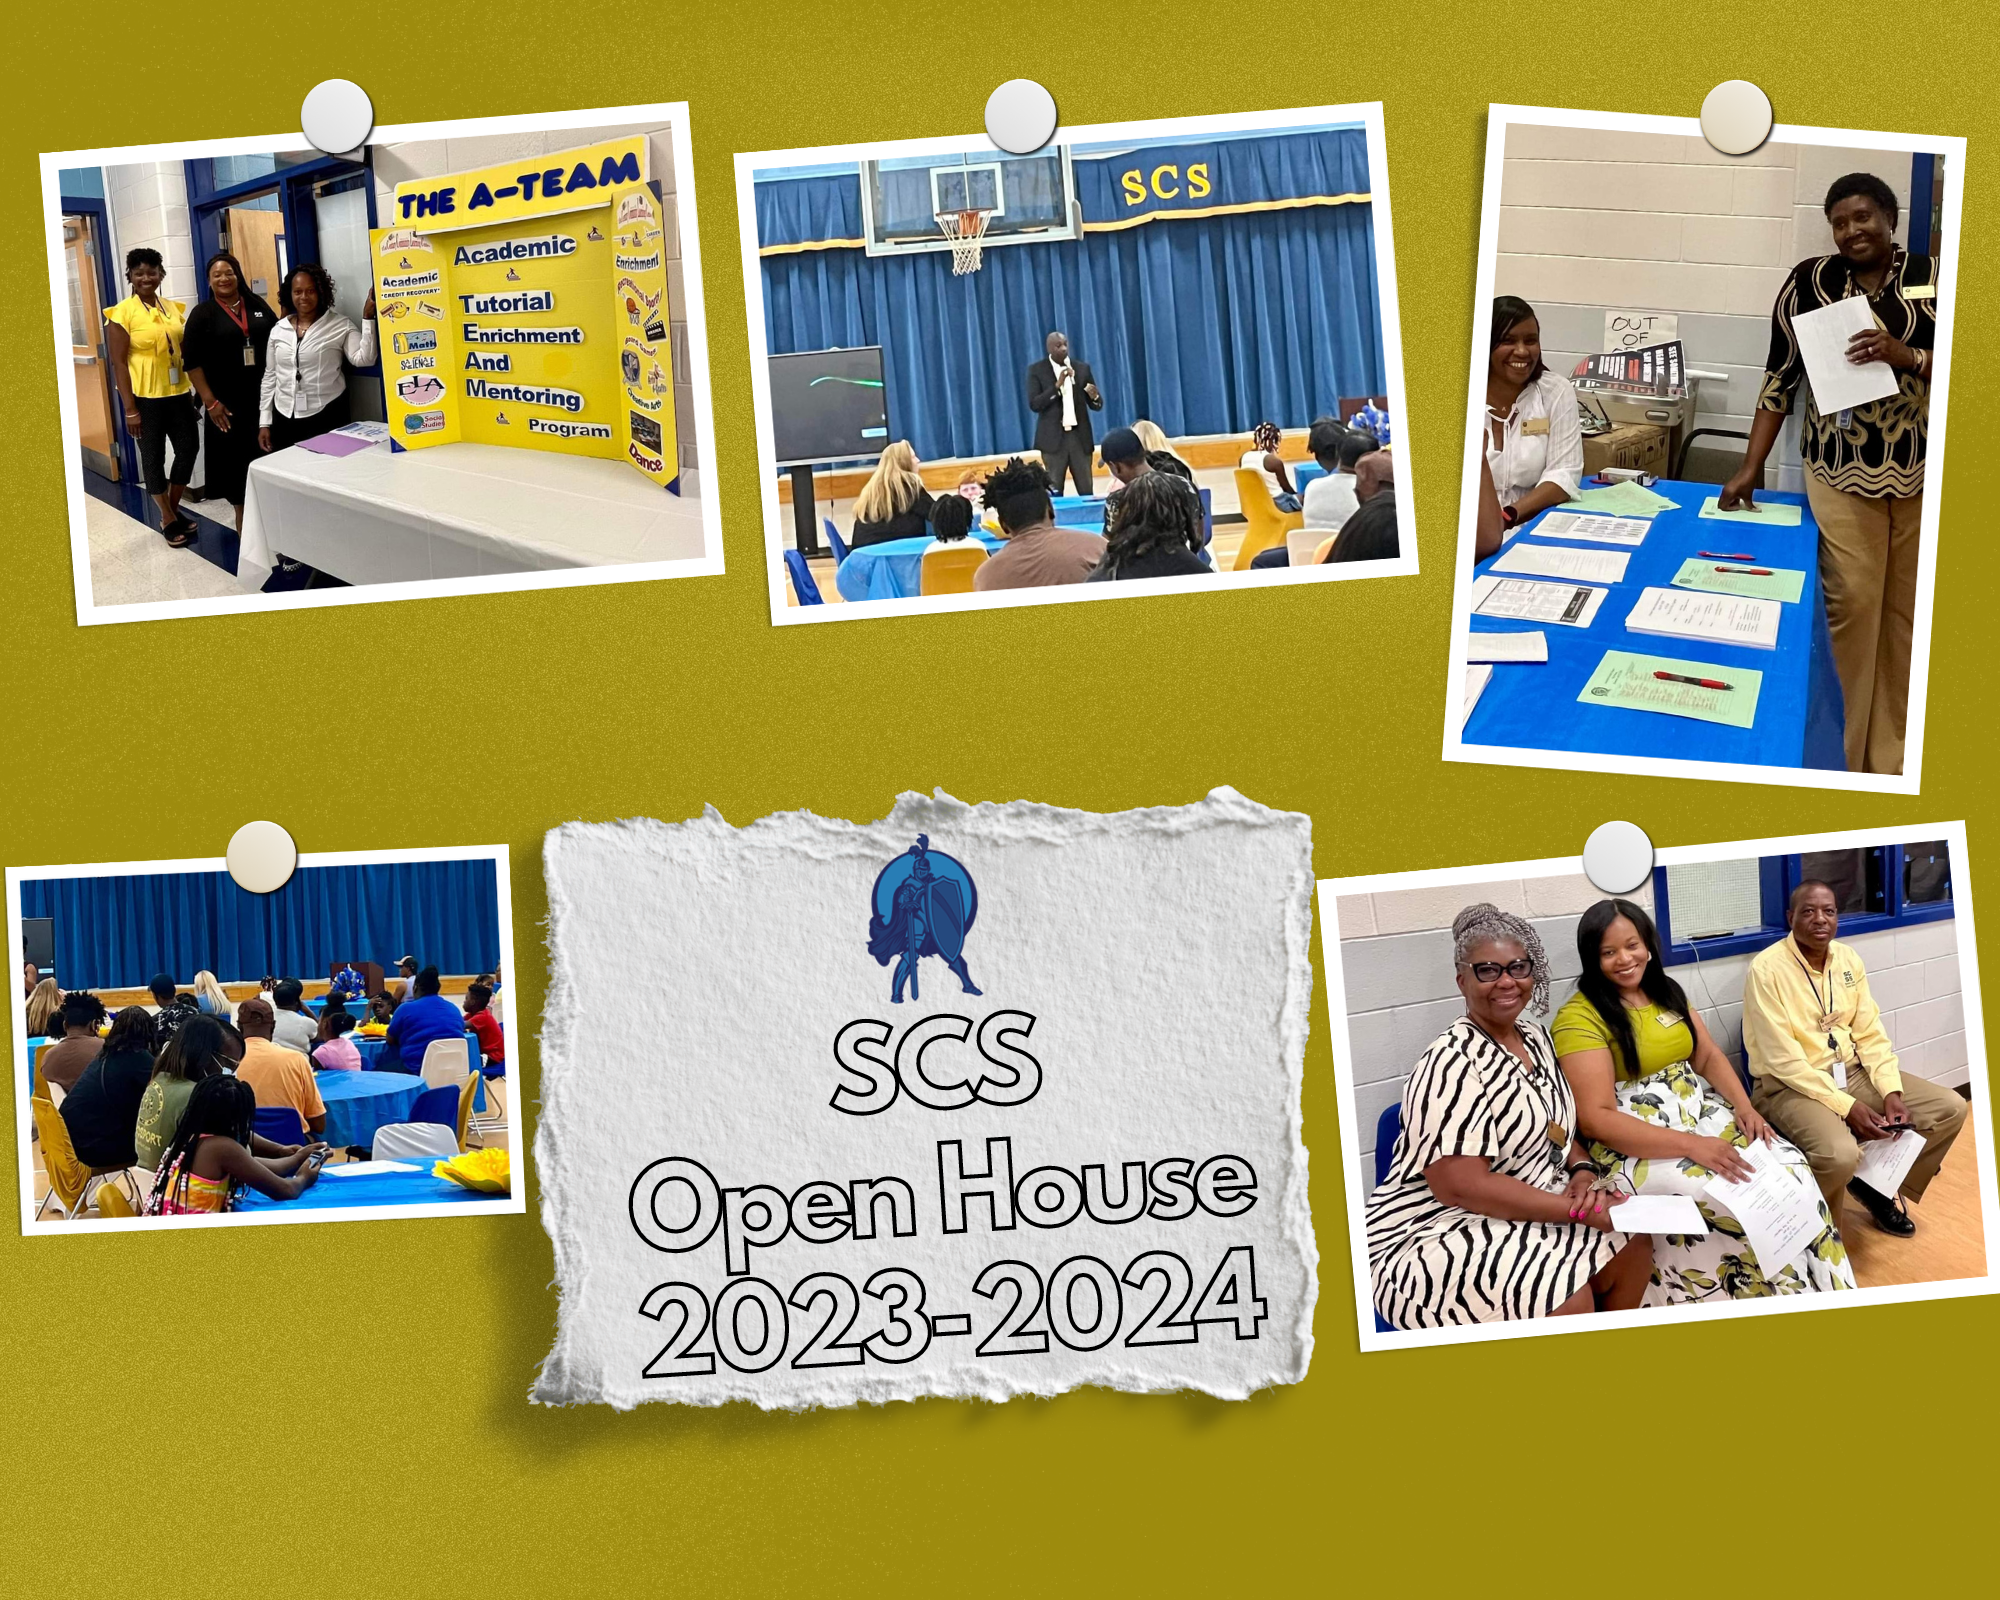 Varus images of open house